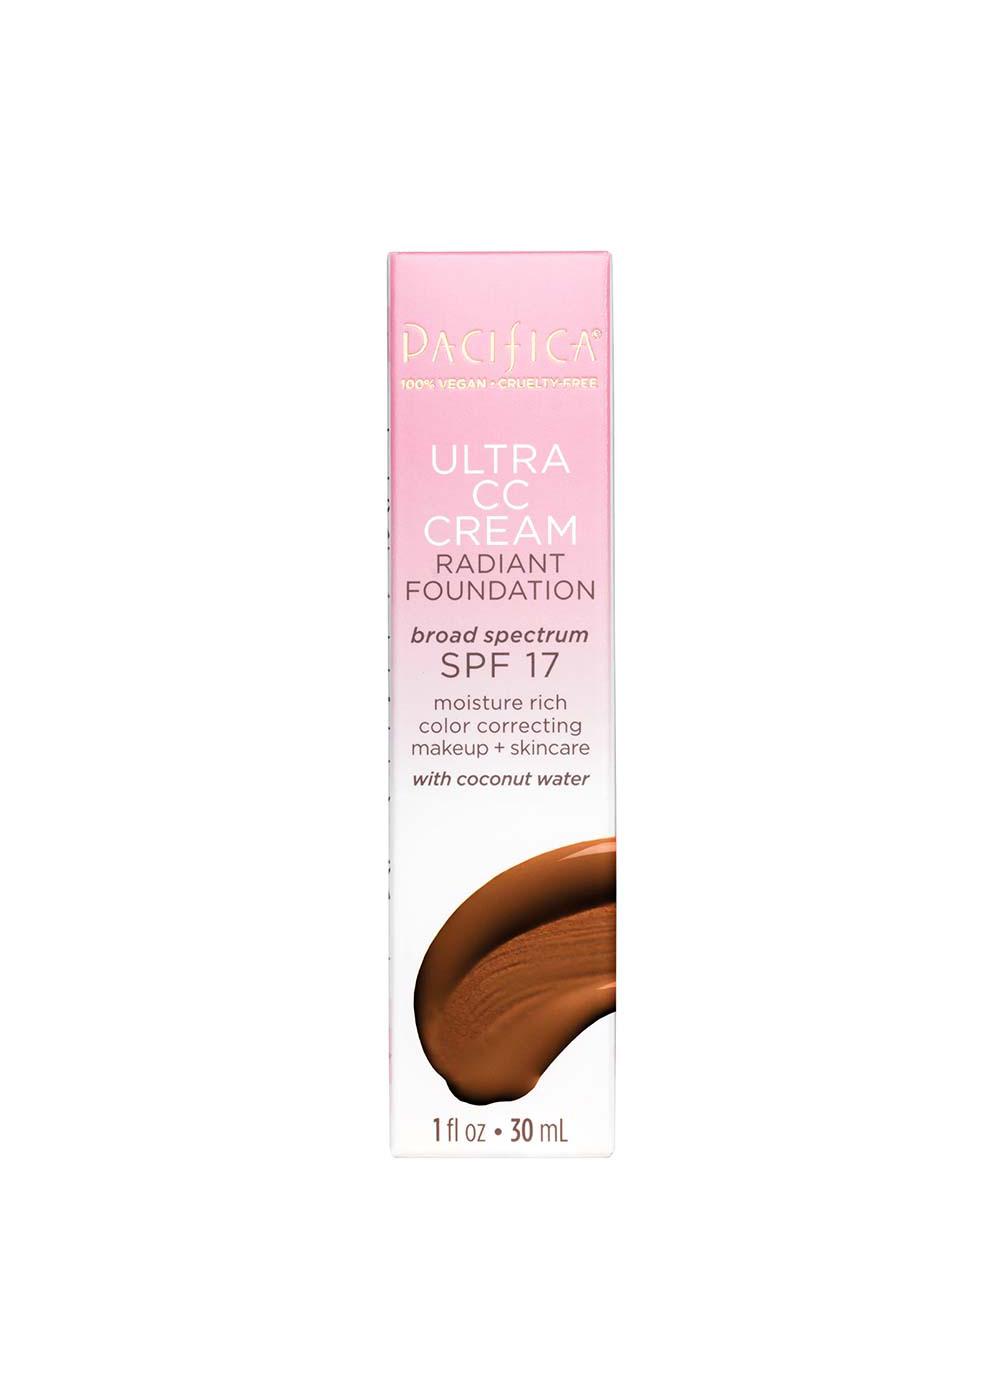 Pacifica Ultra CC Cream Radiant Foundation SPF 17 - Cool Deep; image 1 of 4